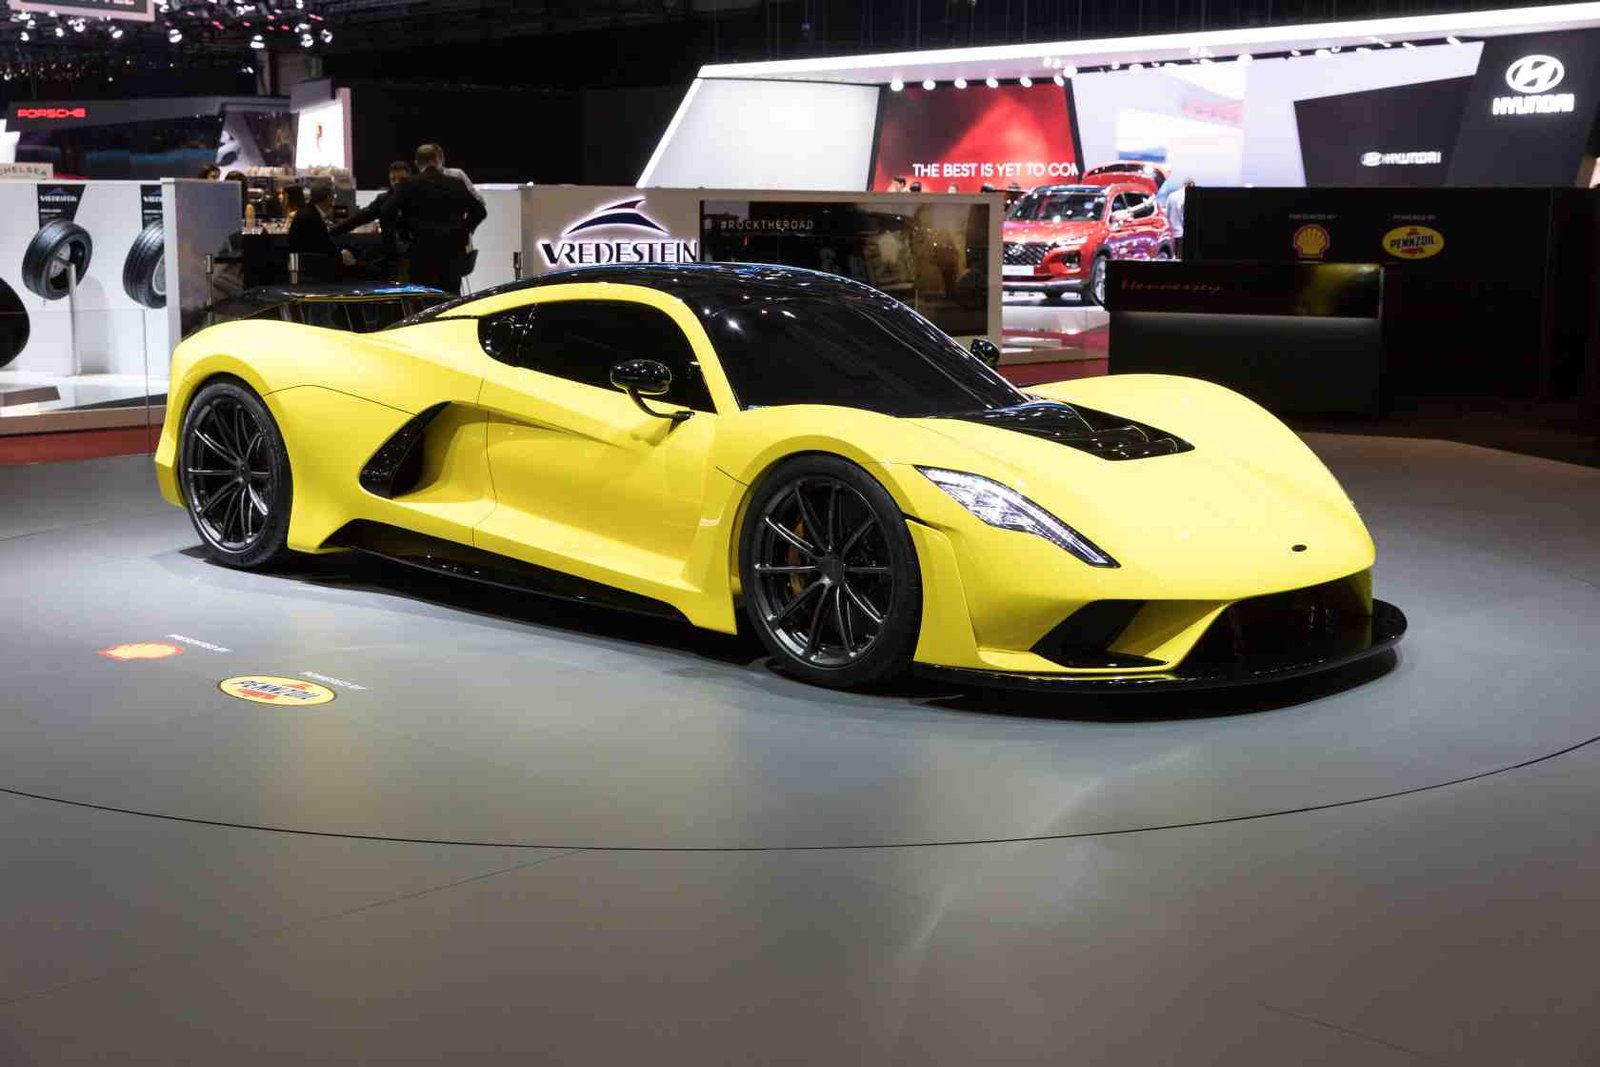 Fastest cars in the world - Hennessey Venom F5